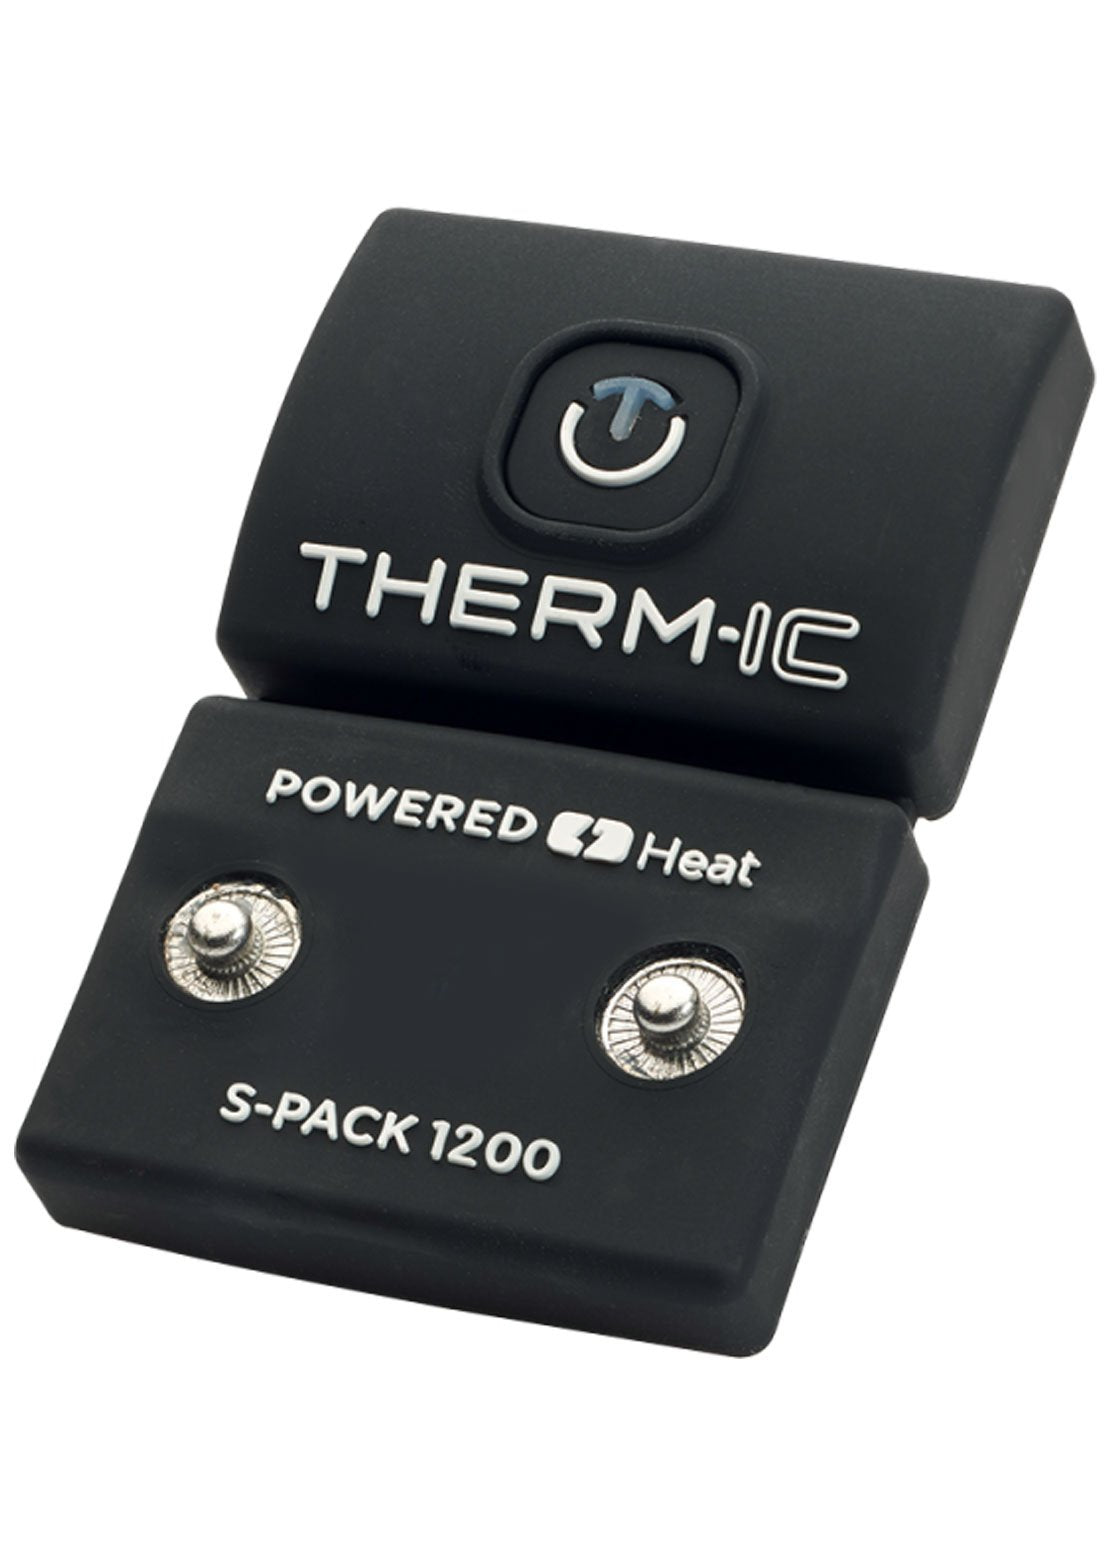 Therm-Ic S-Pack 1200 Powersock Batteries Black